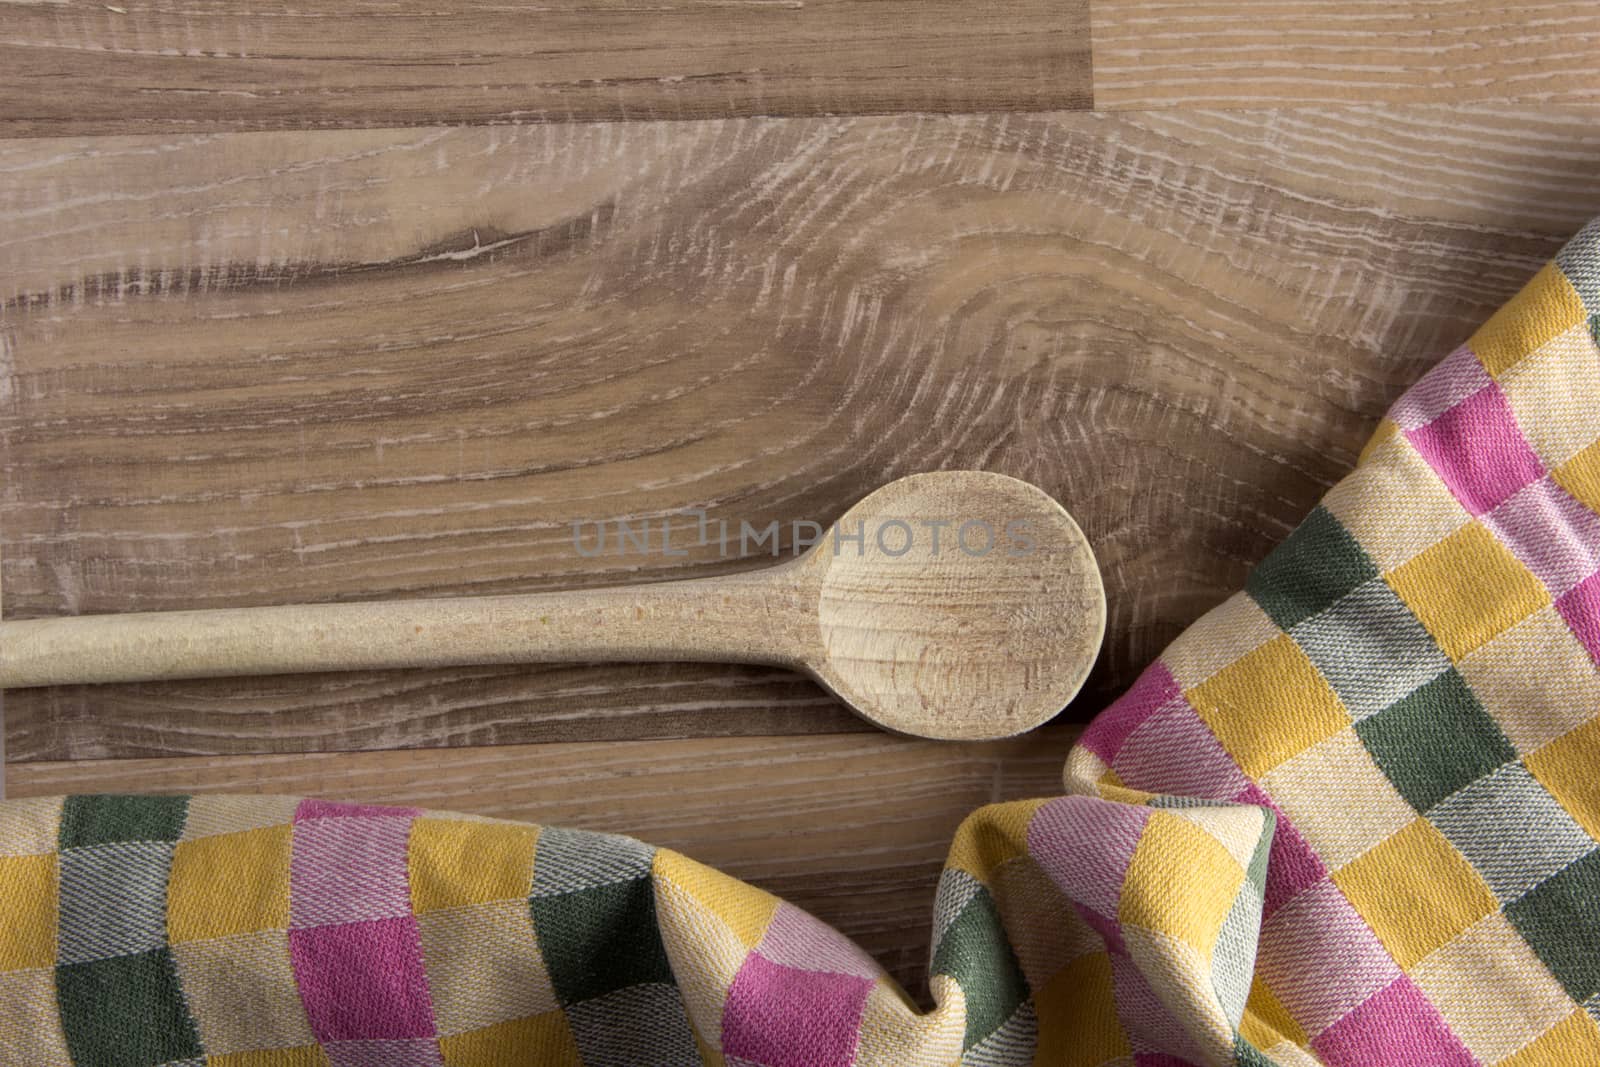 Wooden spoon on wood with colorful tea towel on wooden background 